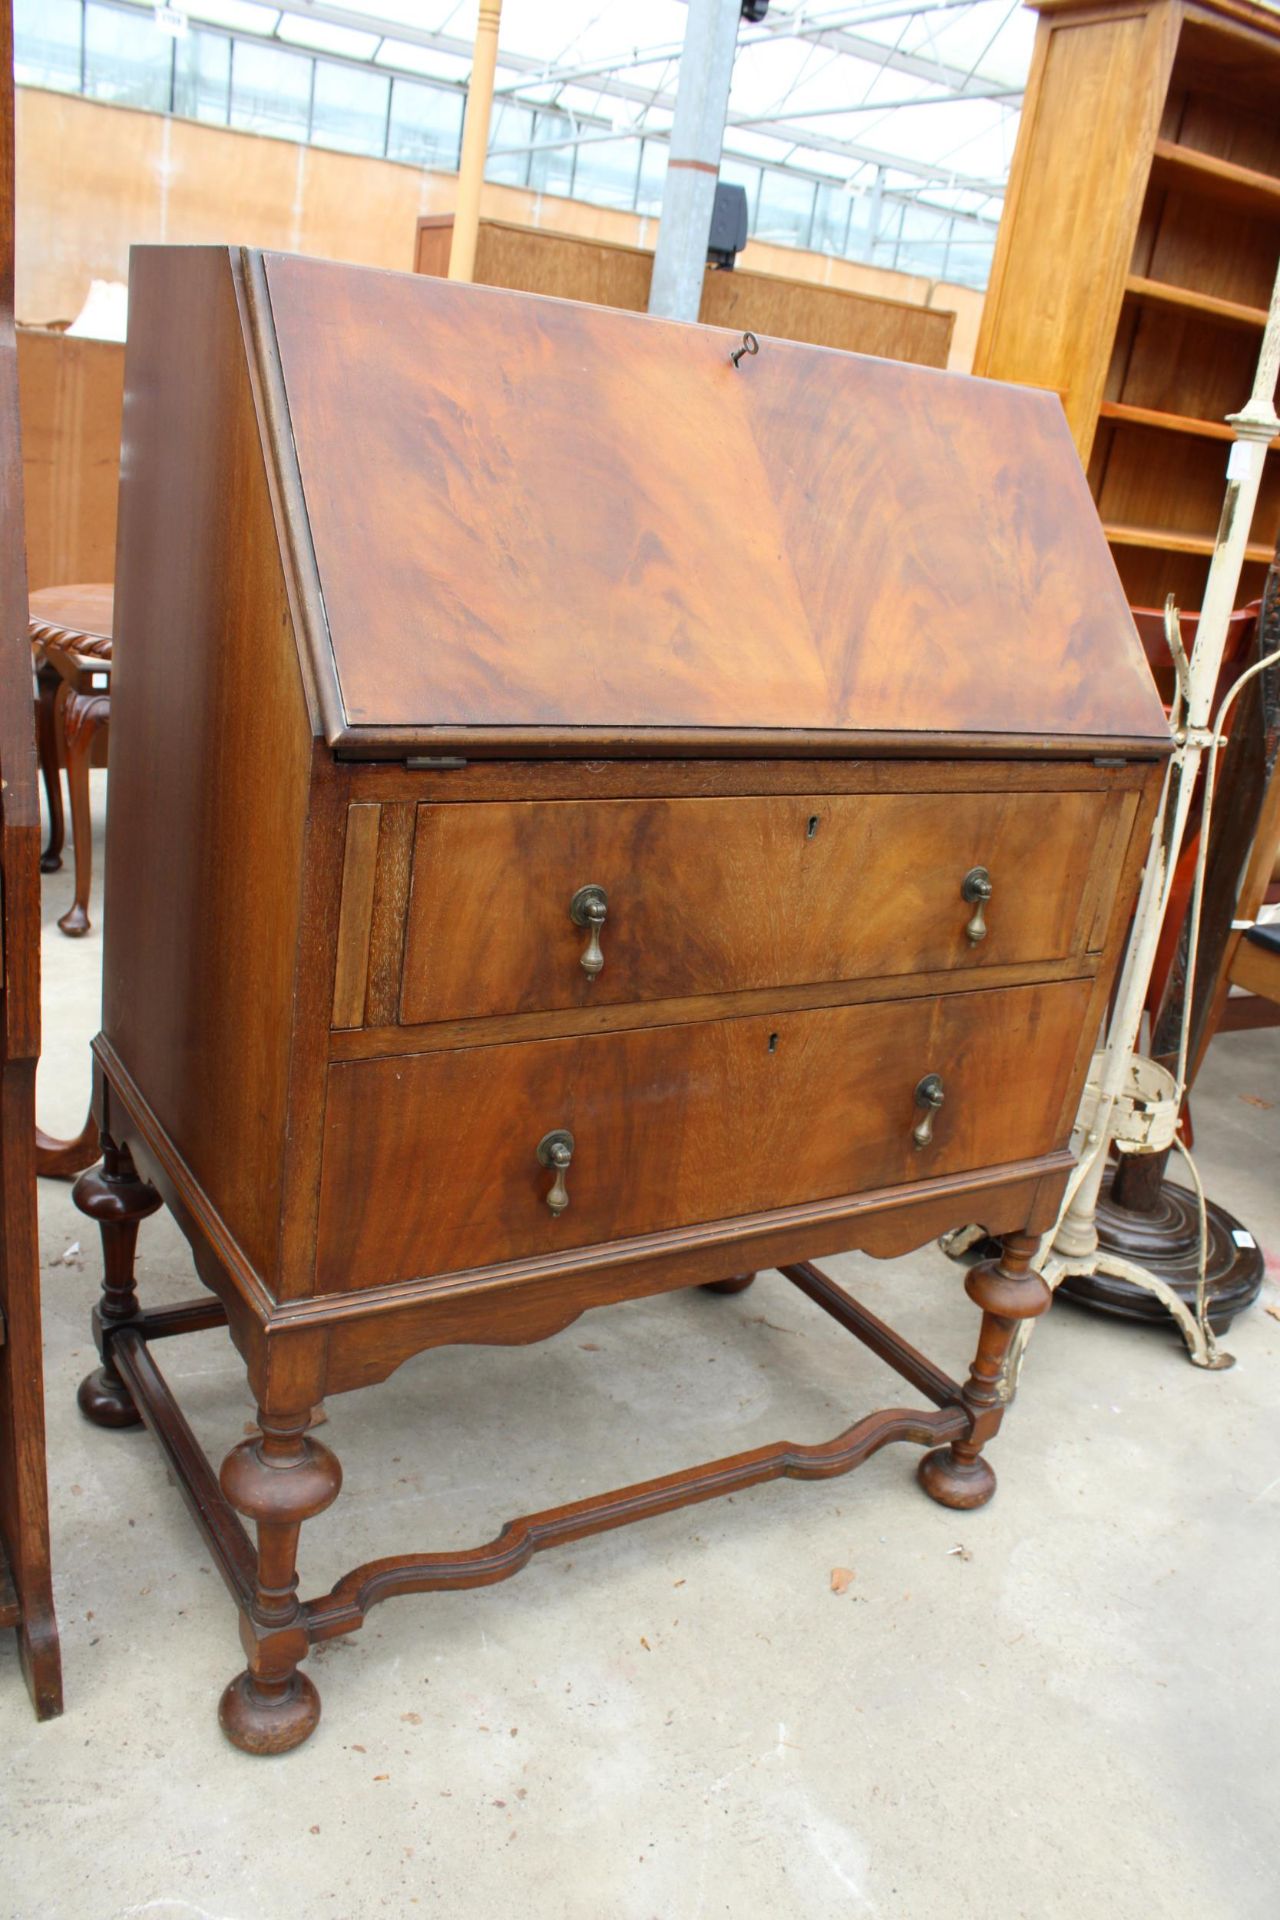 A MID 20TH CENTURY MAHOGANY BUREAU WITH FITTED INTERIOR ON OPEN BASE WITH TURNED LEGS, 29" WIDE - Image 3 of 3